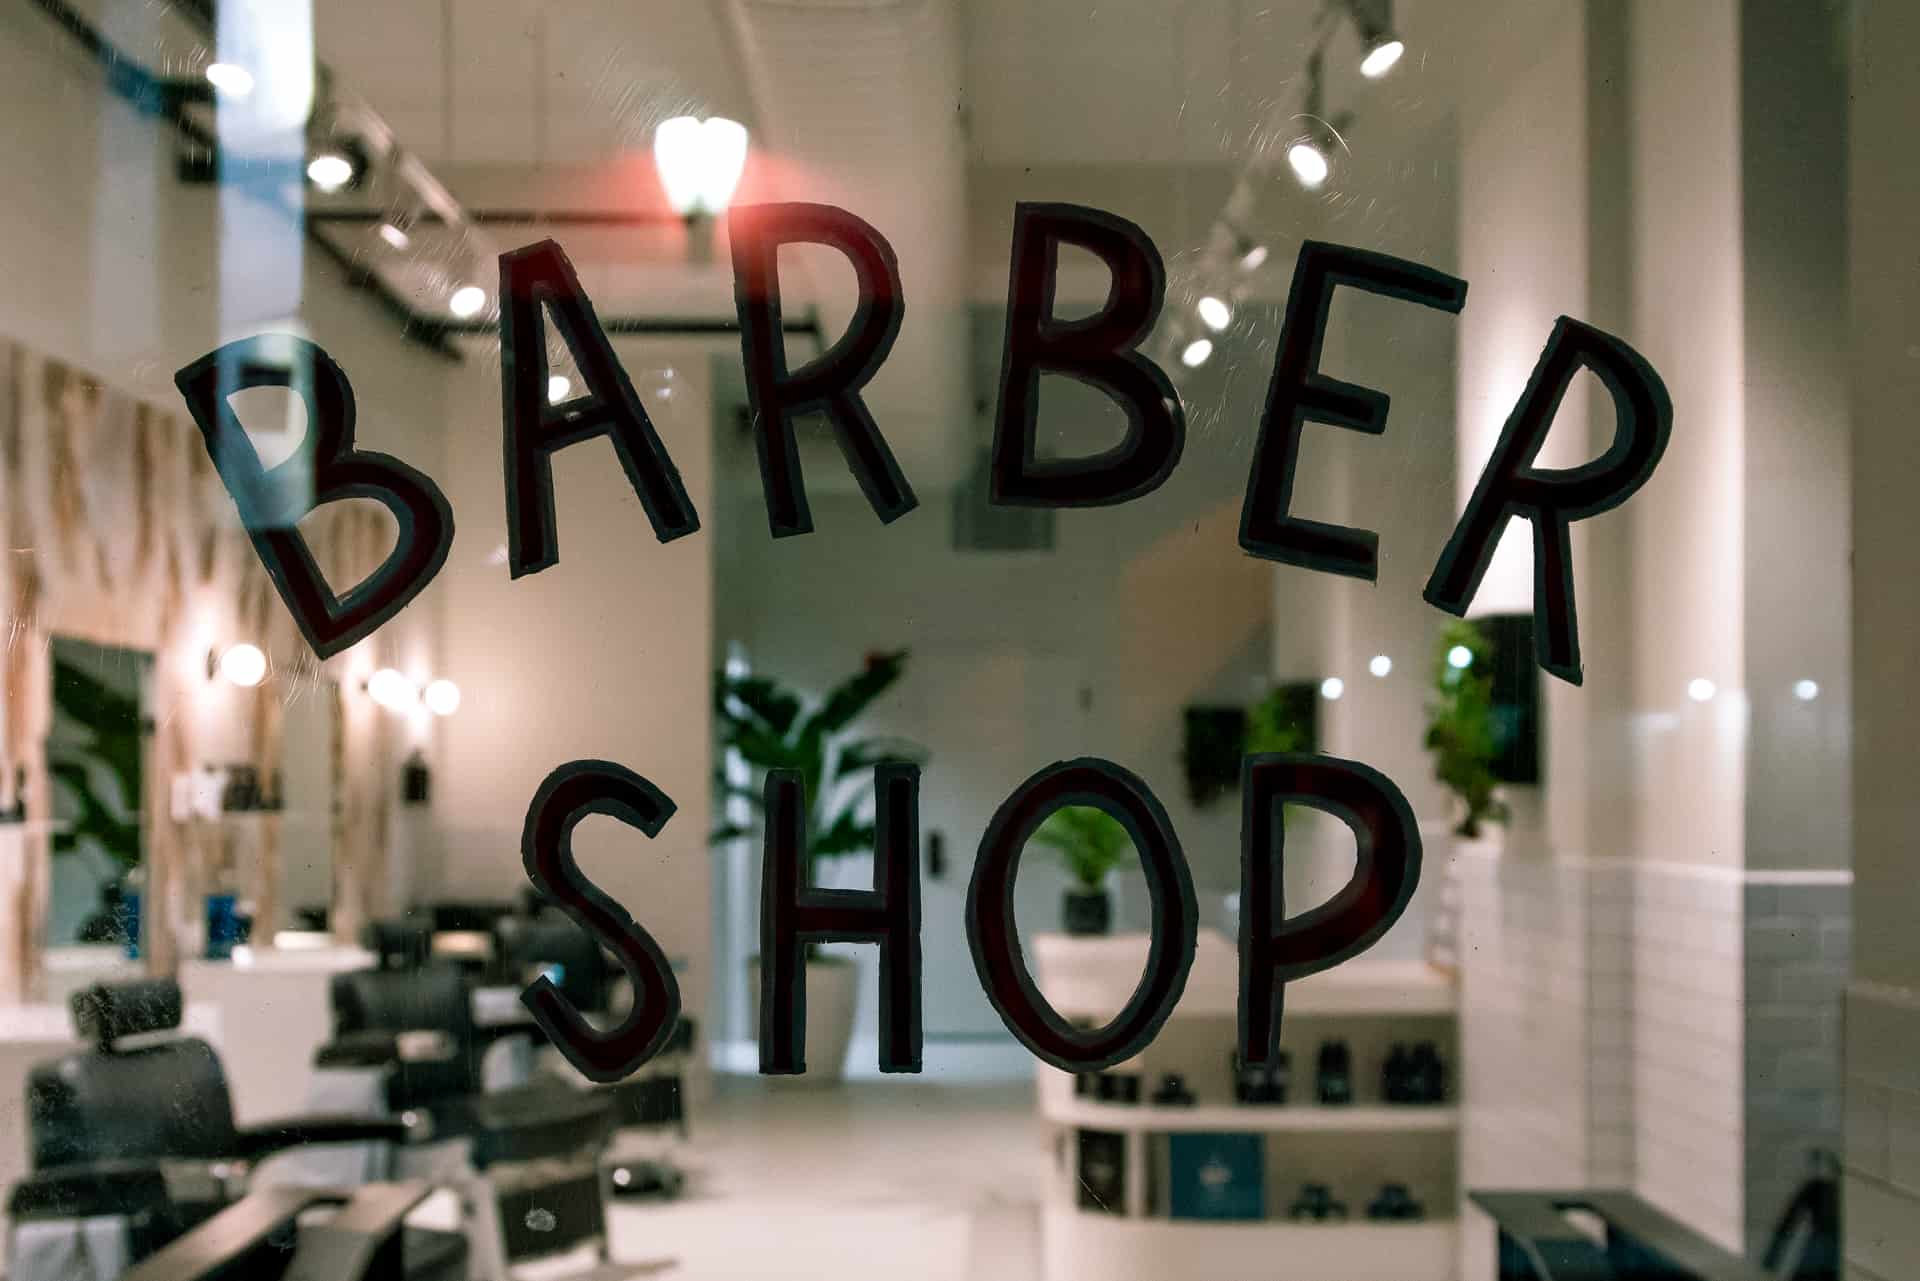 Service Retail Business Photograph of the Barbershop at Blind Barber in Philadelphia, PA